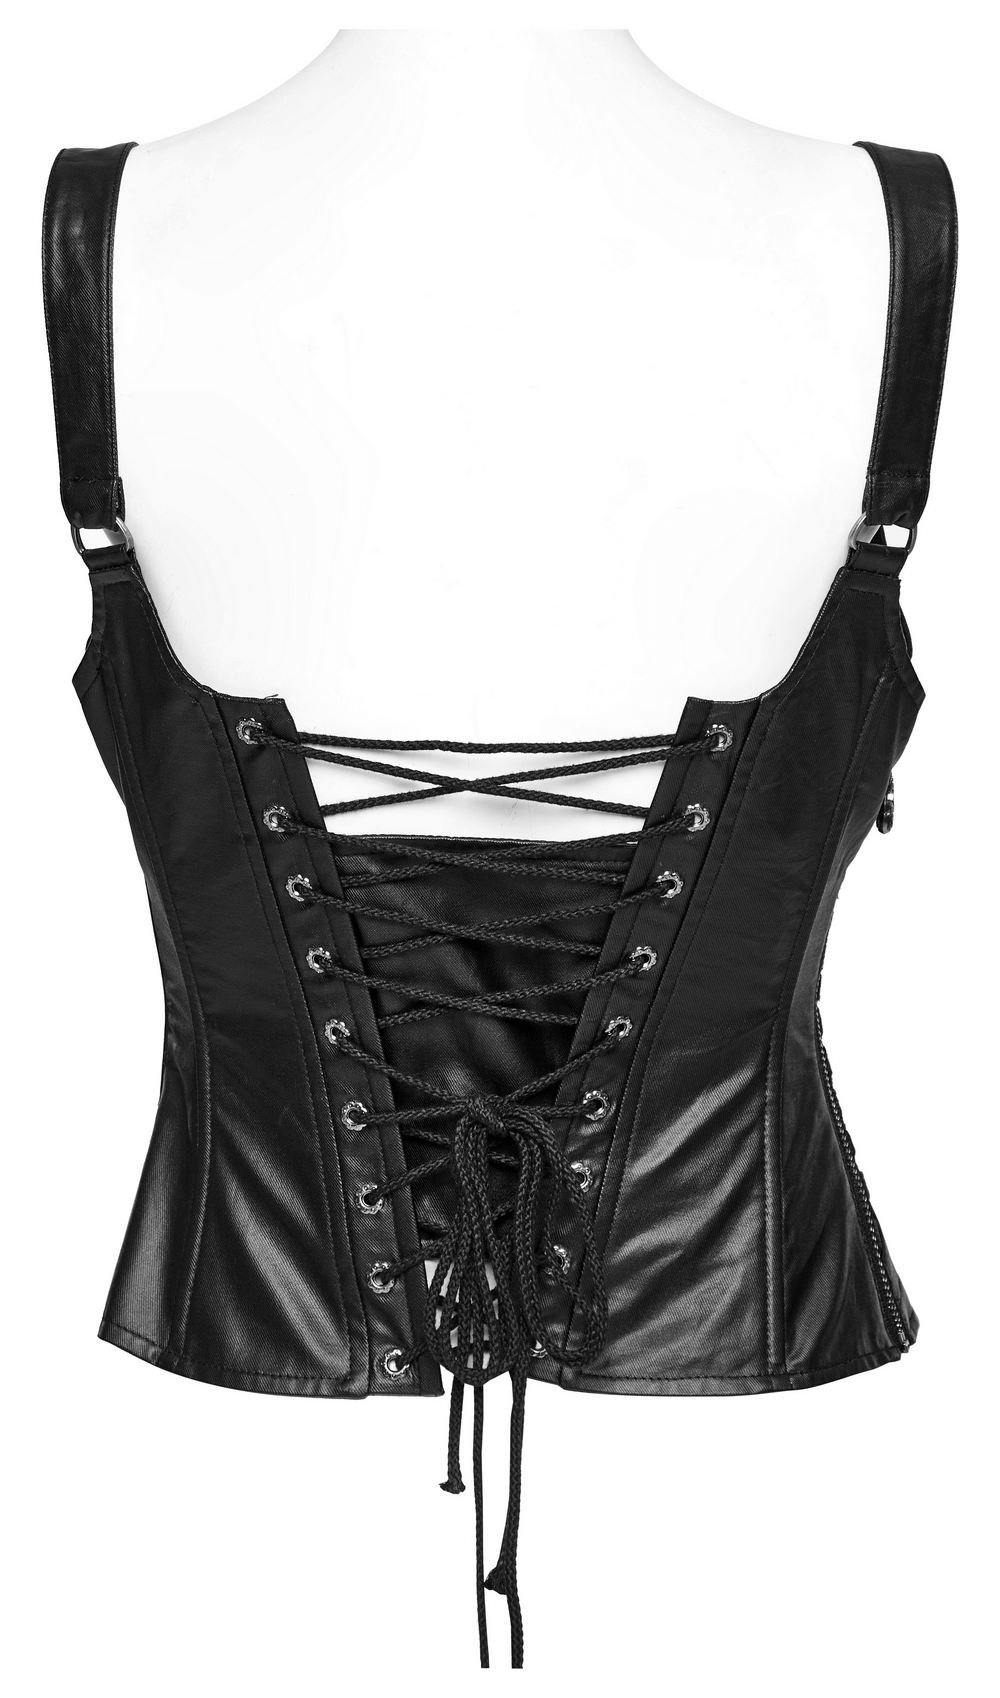 Adjustable Strappy Black Gothic Lace-Up Corset